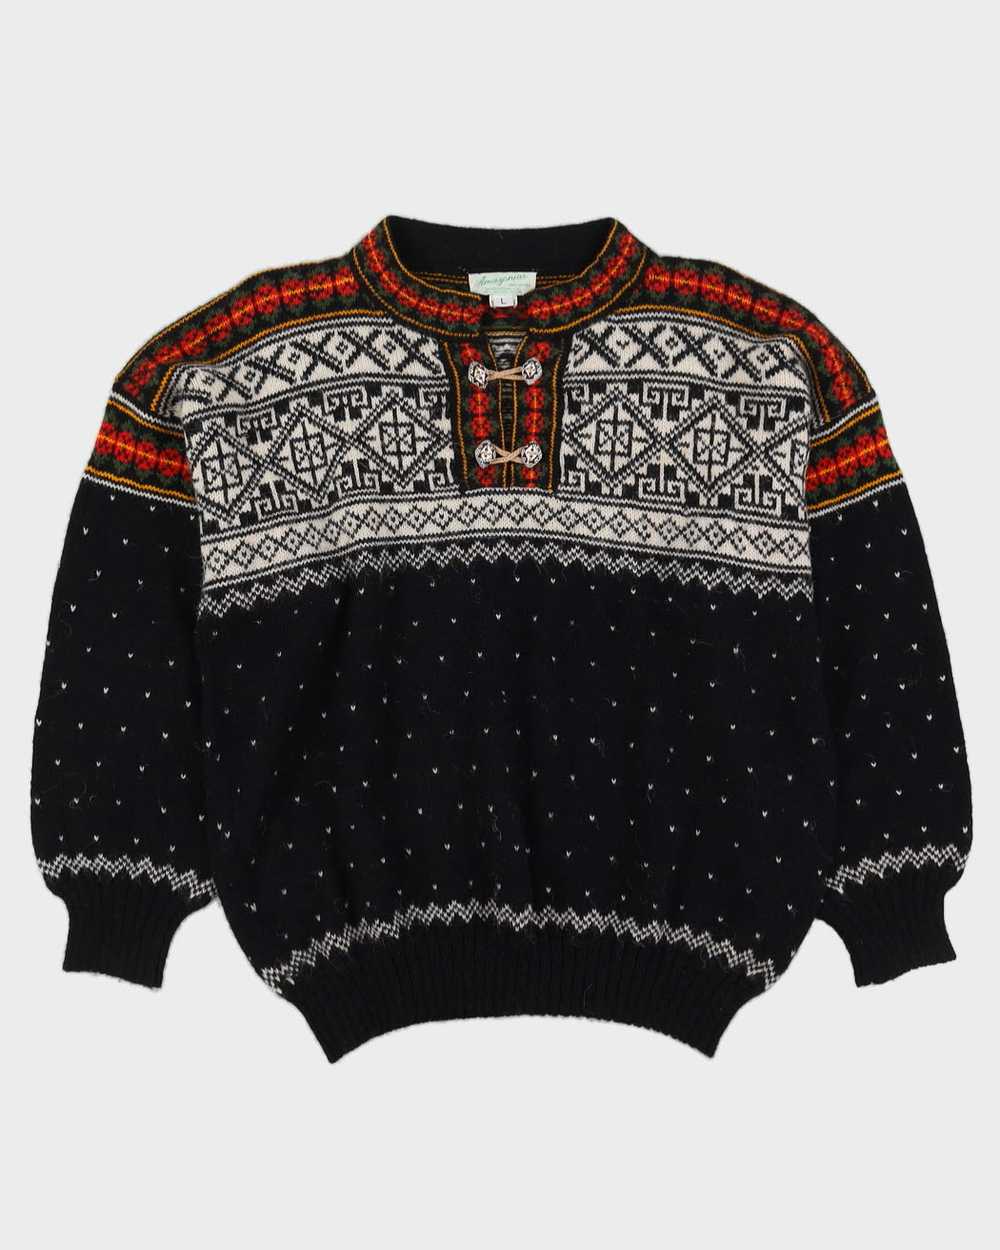 Scandi Style Patterned Hand-Knitted Jumper - L - image 1